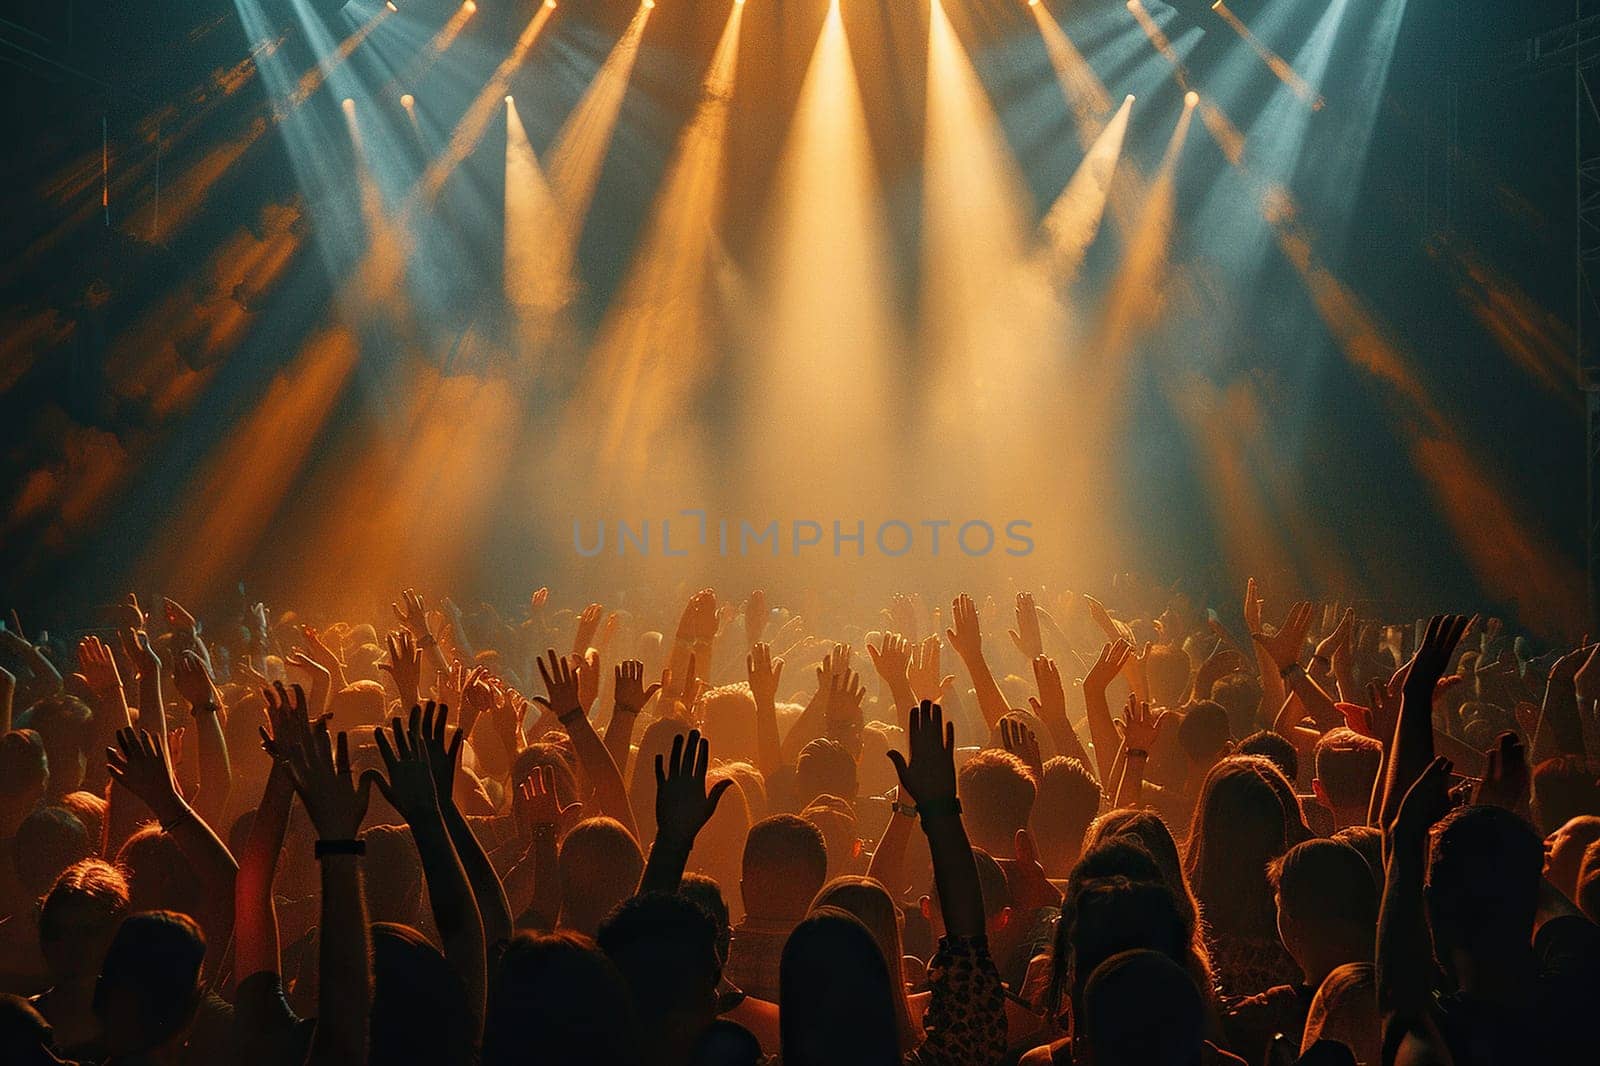 A crowd of people with their hands raised up in the bright rays of spotlights at night. Concert, sporting event.